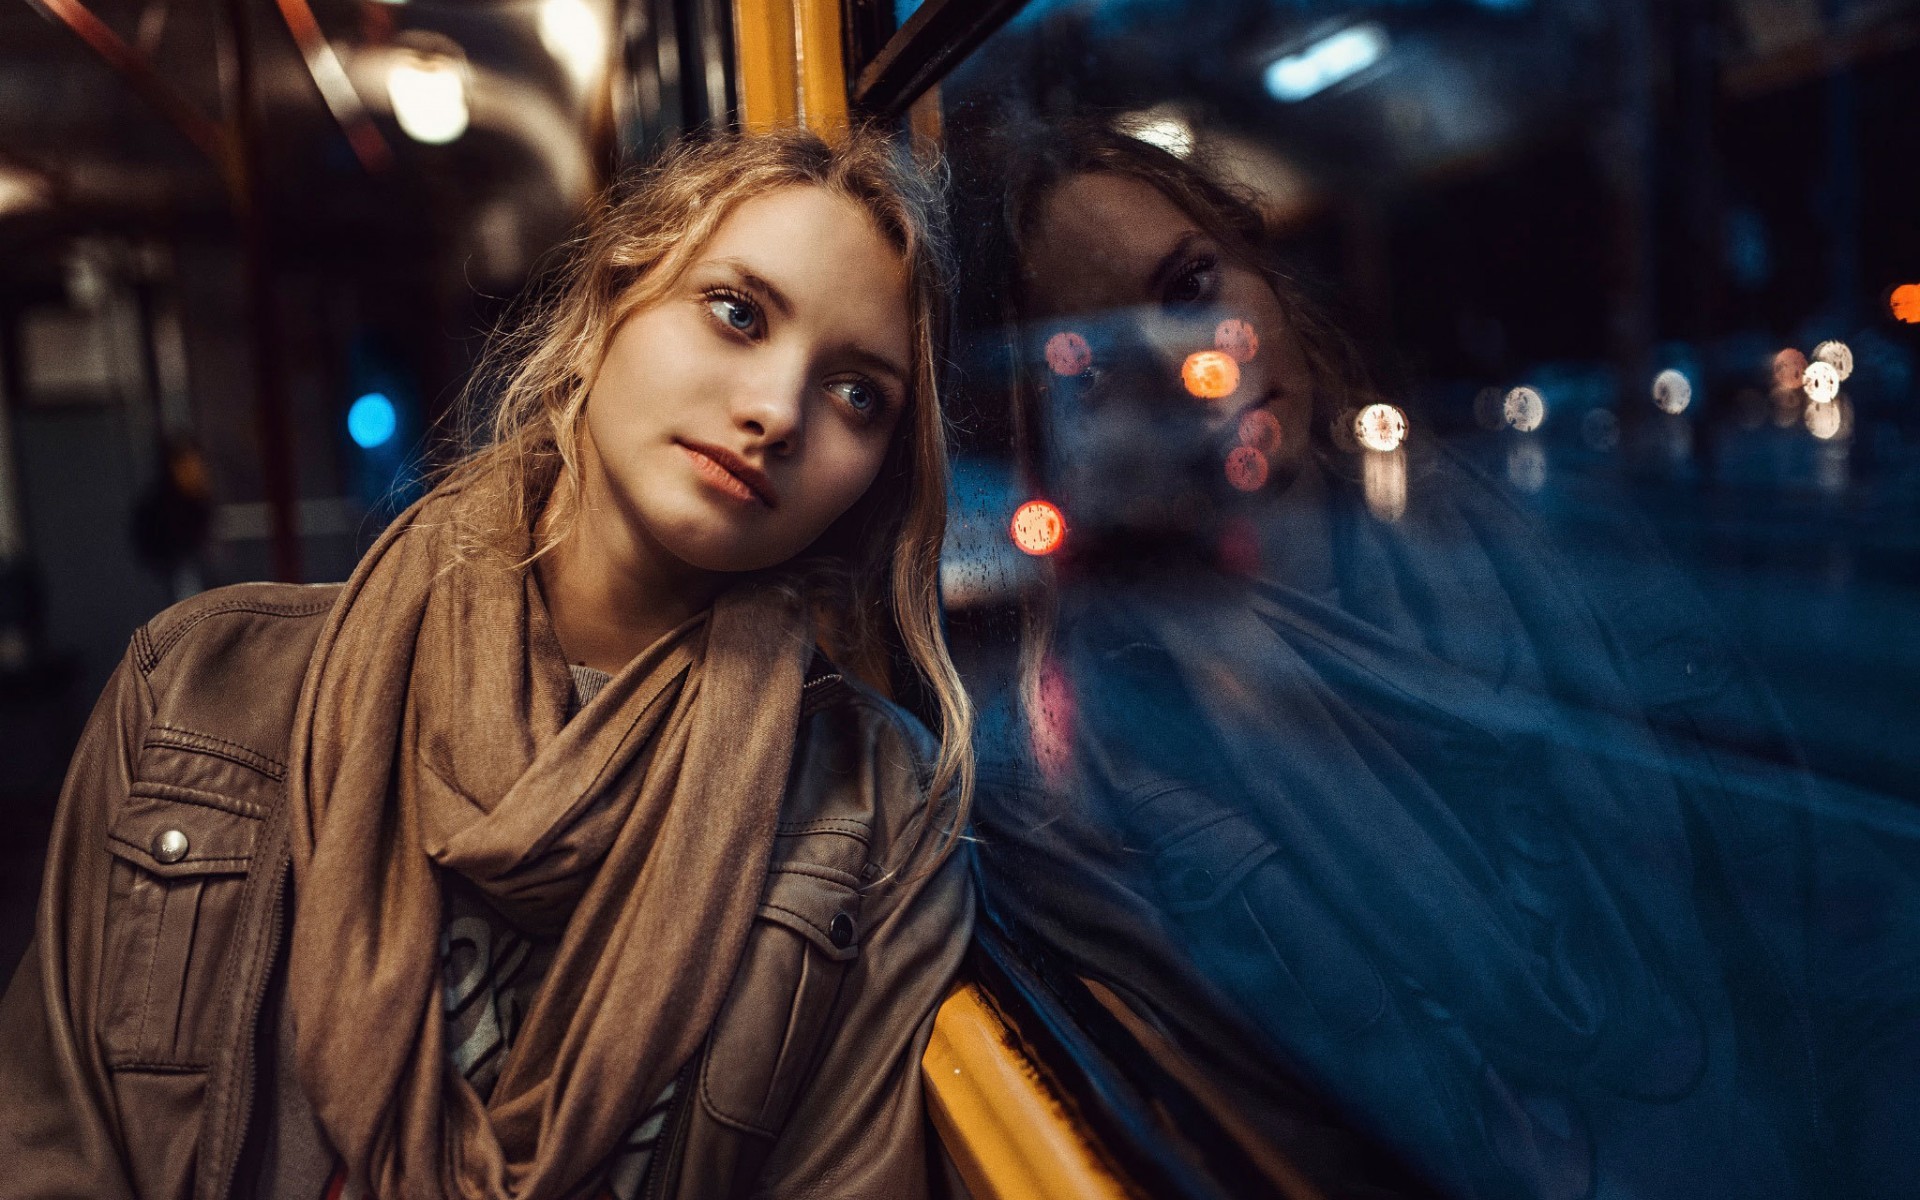 Women Reflection Blue Eyes Scarf Vehicle Brown Jacket Looking Out Window 1920x1200